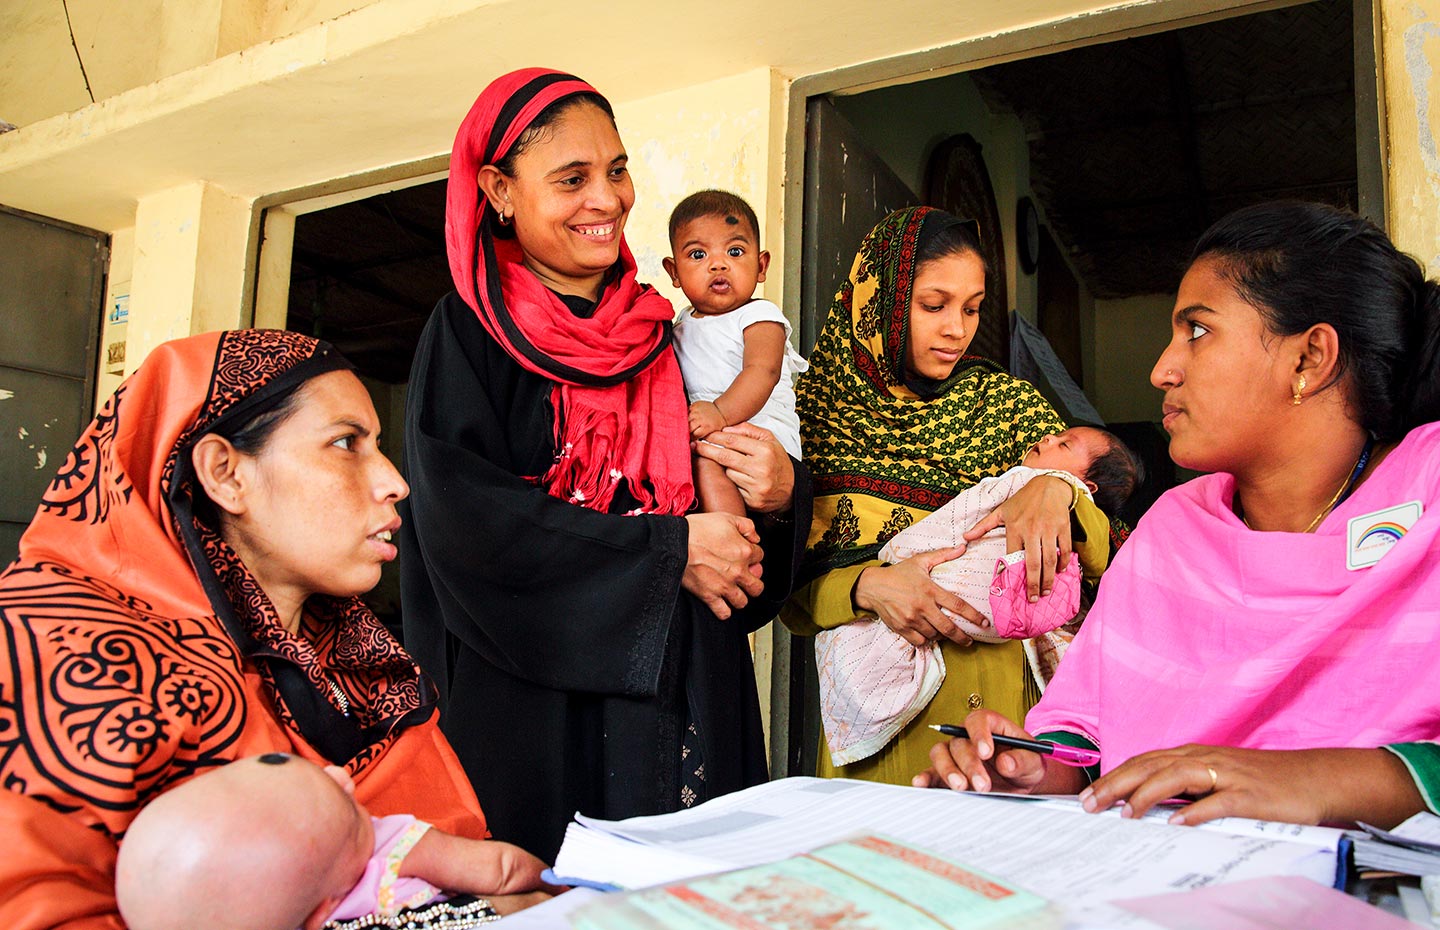 Gavi/2015/GMB Akash – Parents attend the vaccine session at the EPI centre in Dhaka, Bangladesh